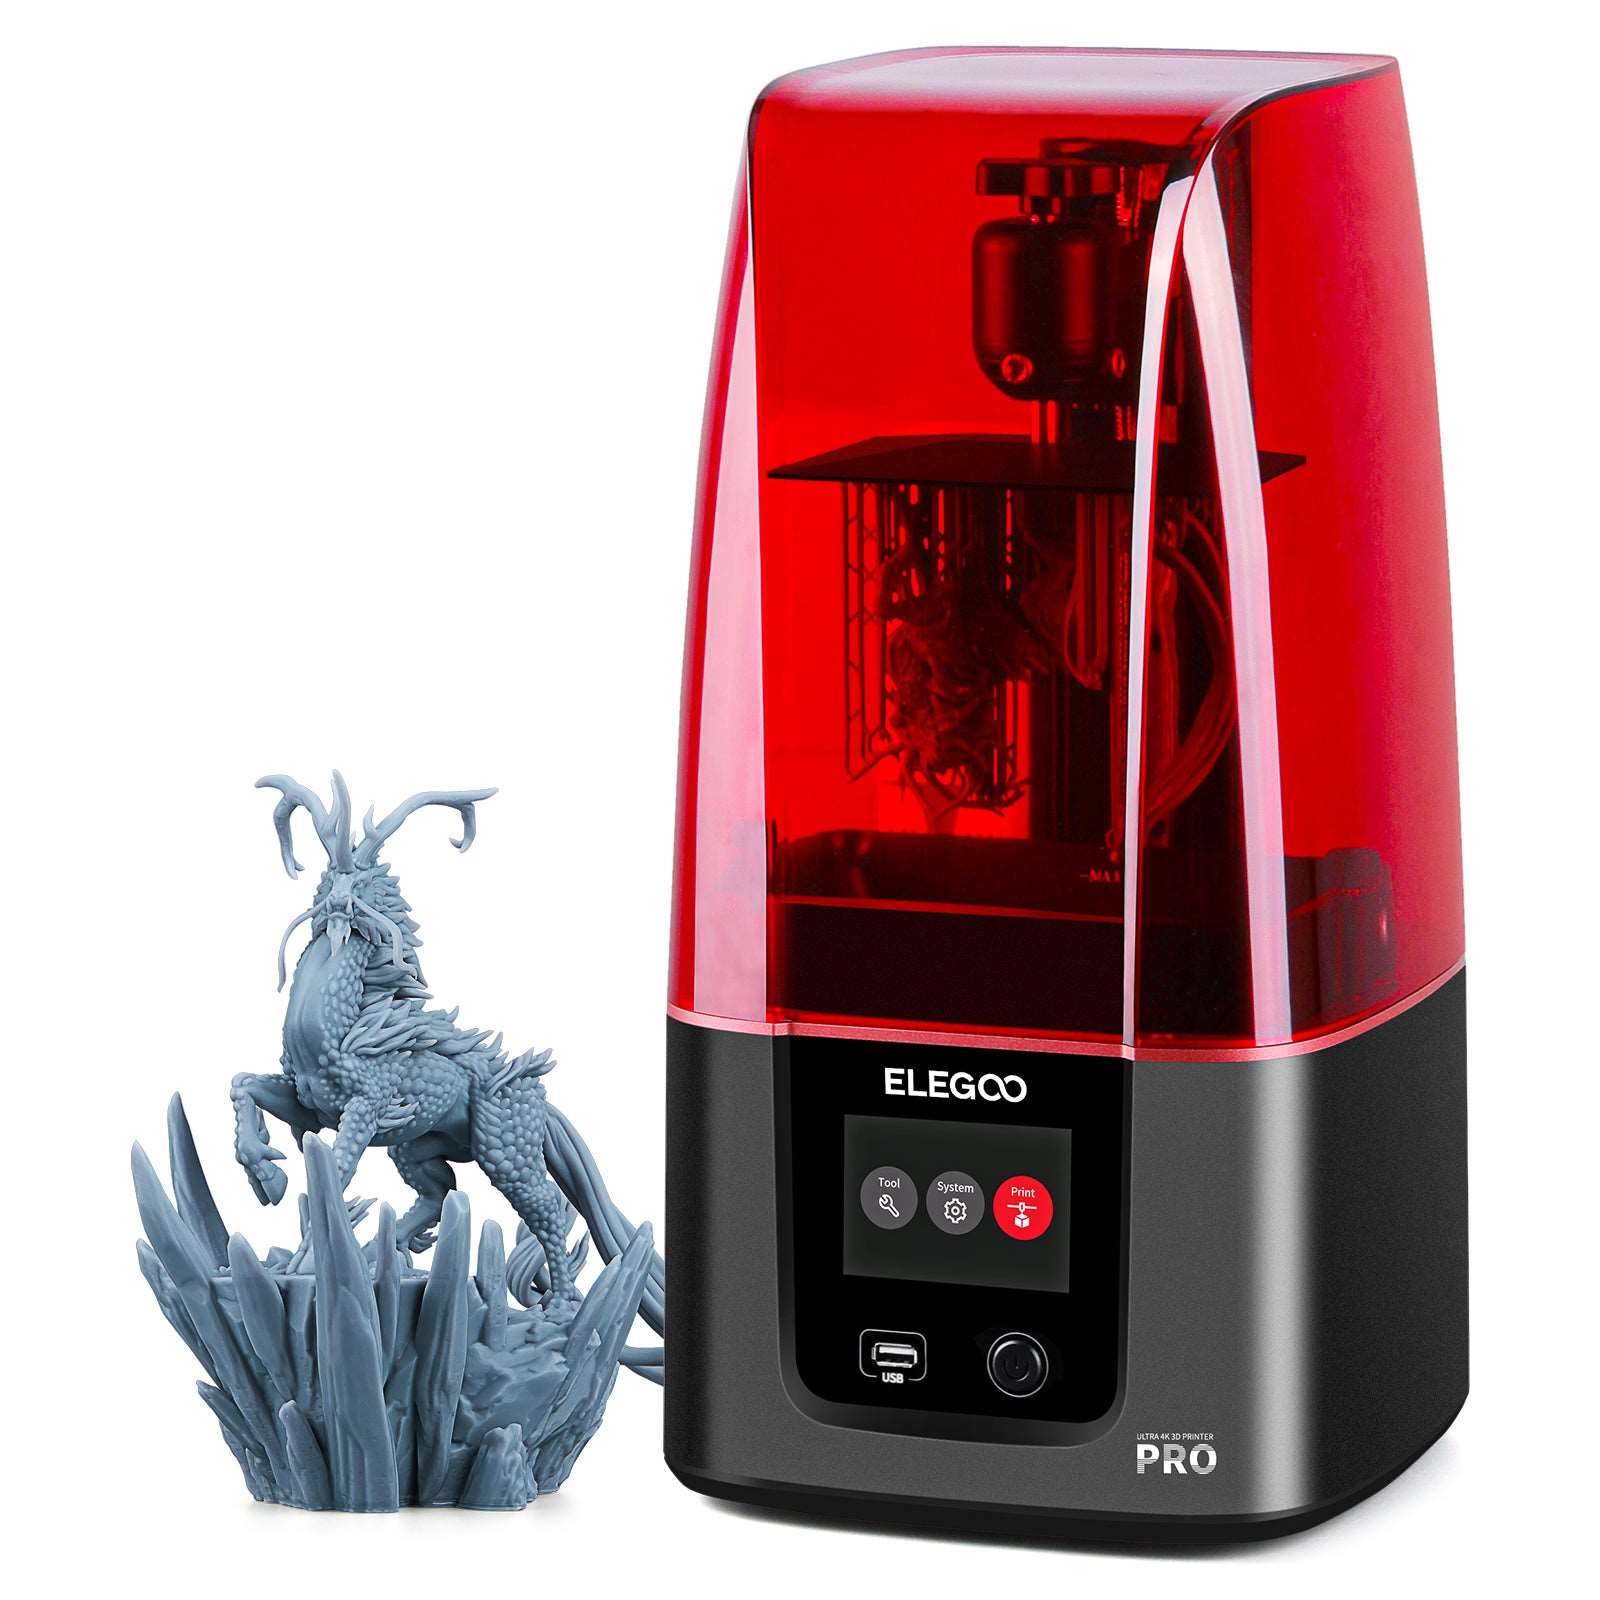 ELEGOO's Mars 3 Pro MSLA Resin 3D Printer falls to new all-time low of $255  (Save 29%)